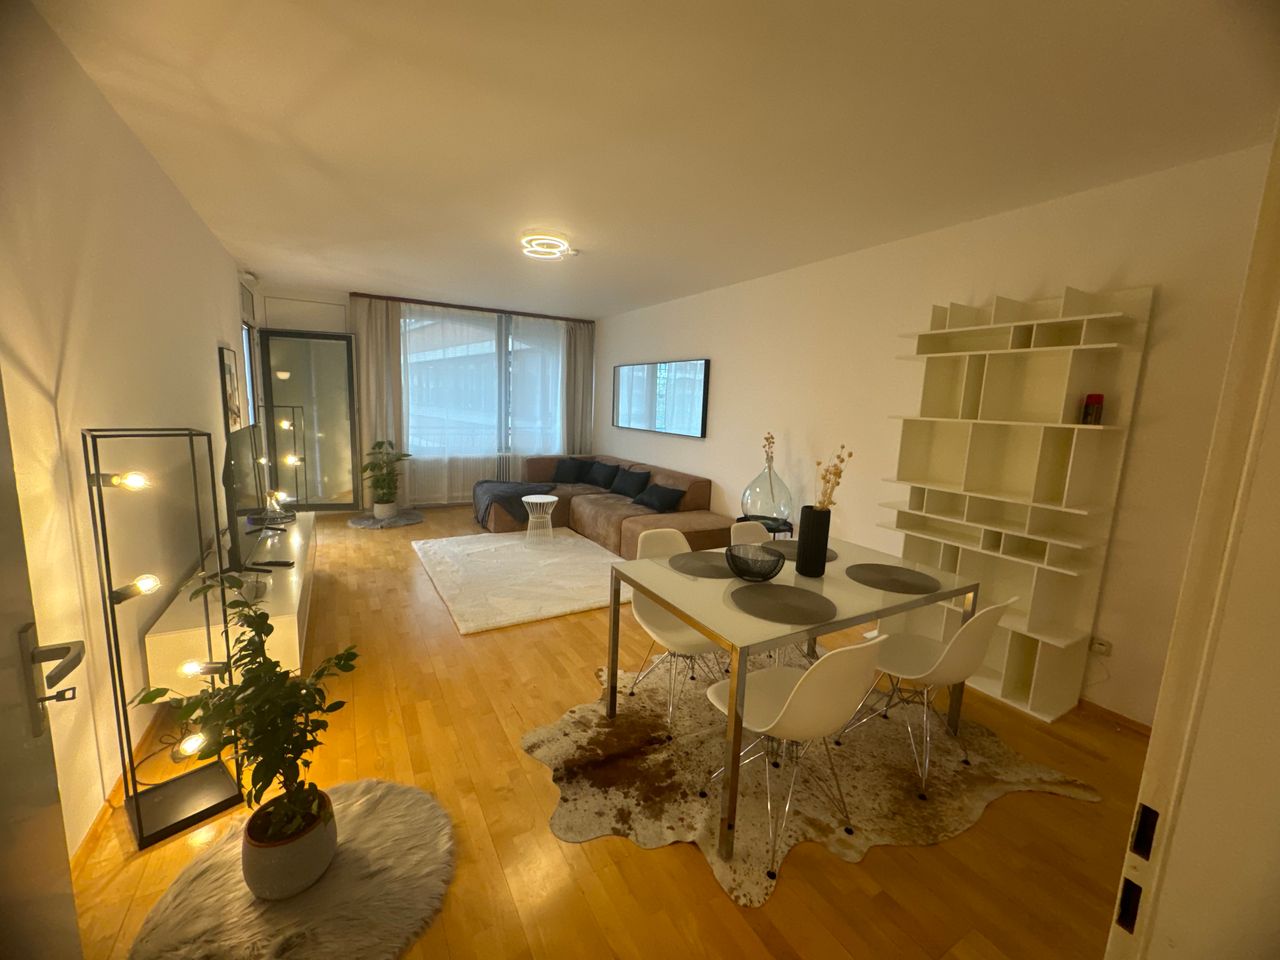 Nice apartment located in München Pasing